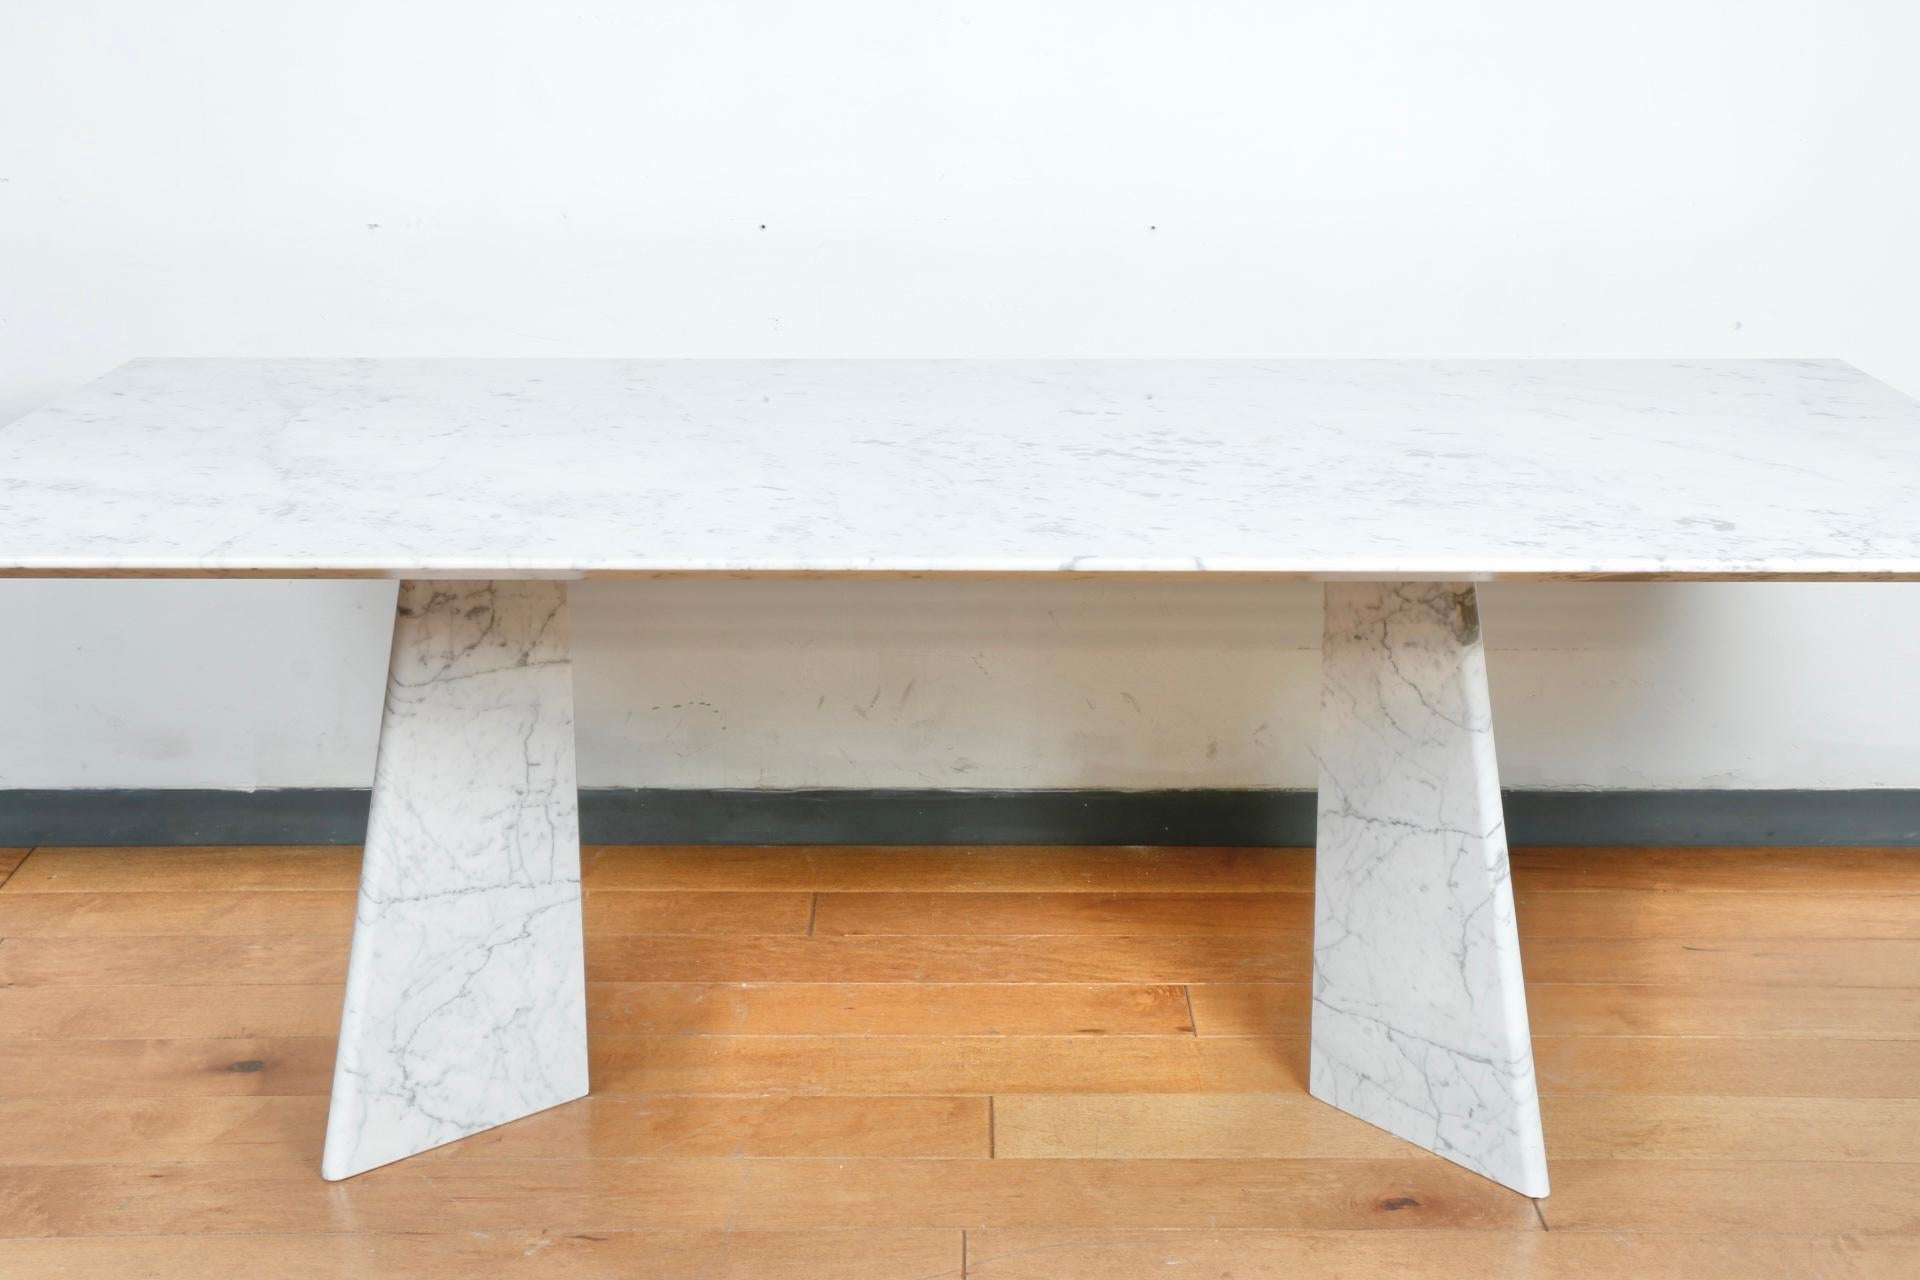 Amazing 3 piece marble dining table. Well kept with nice abstract bases. Marble top is well kept and sits beautifully on the bases. Great for dining table or conference table. Seats about 6 people.